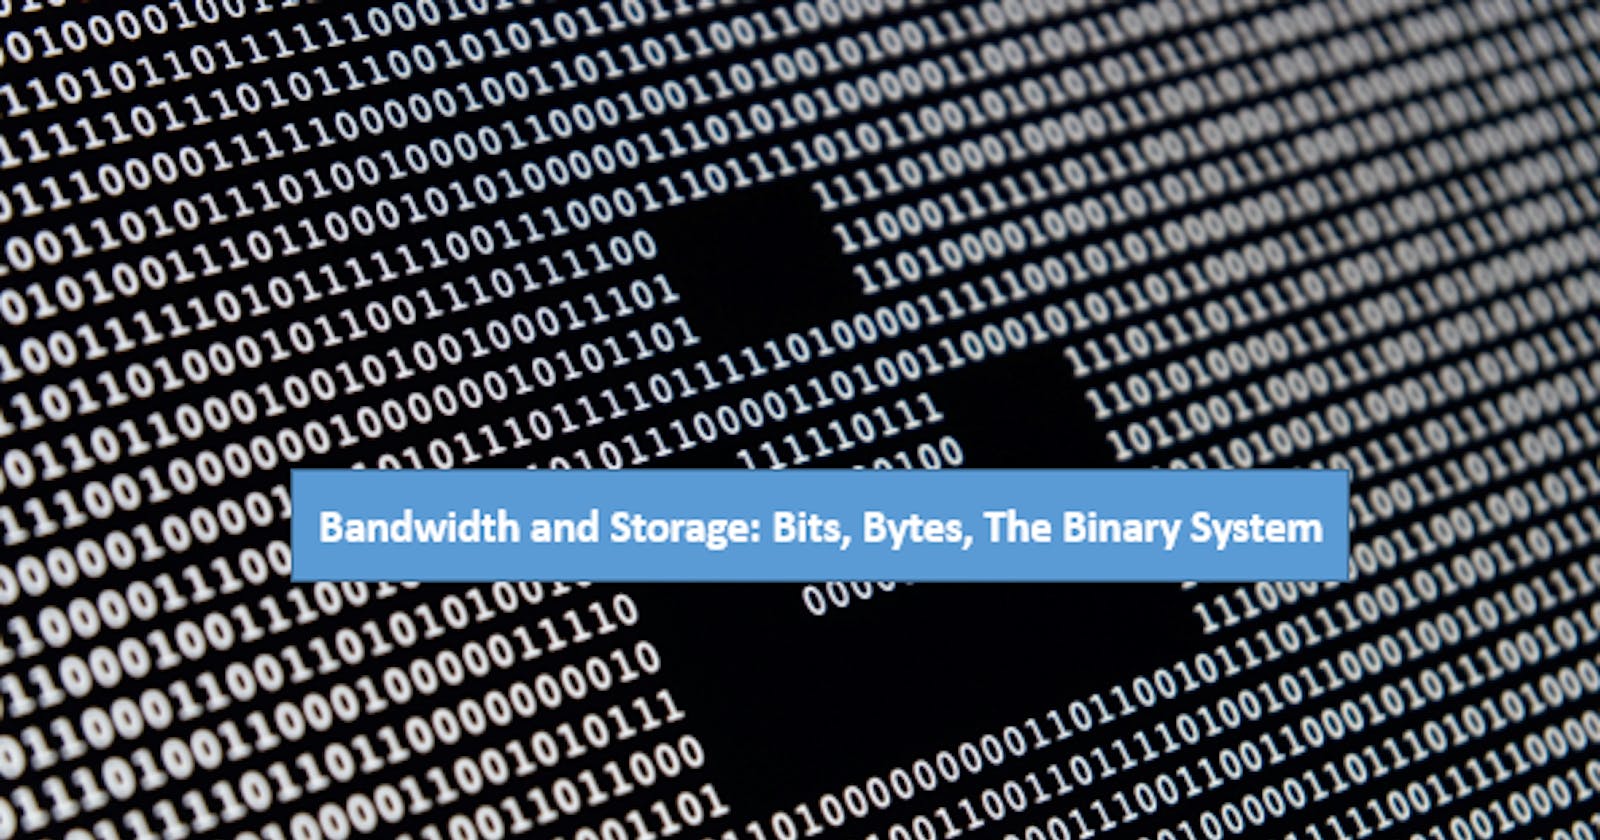 Bandwidth and Storage: Bits, Bytes, and the Binary System